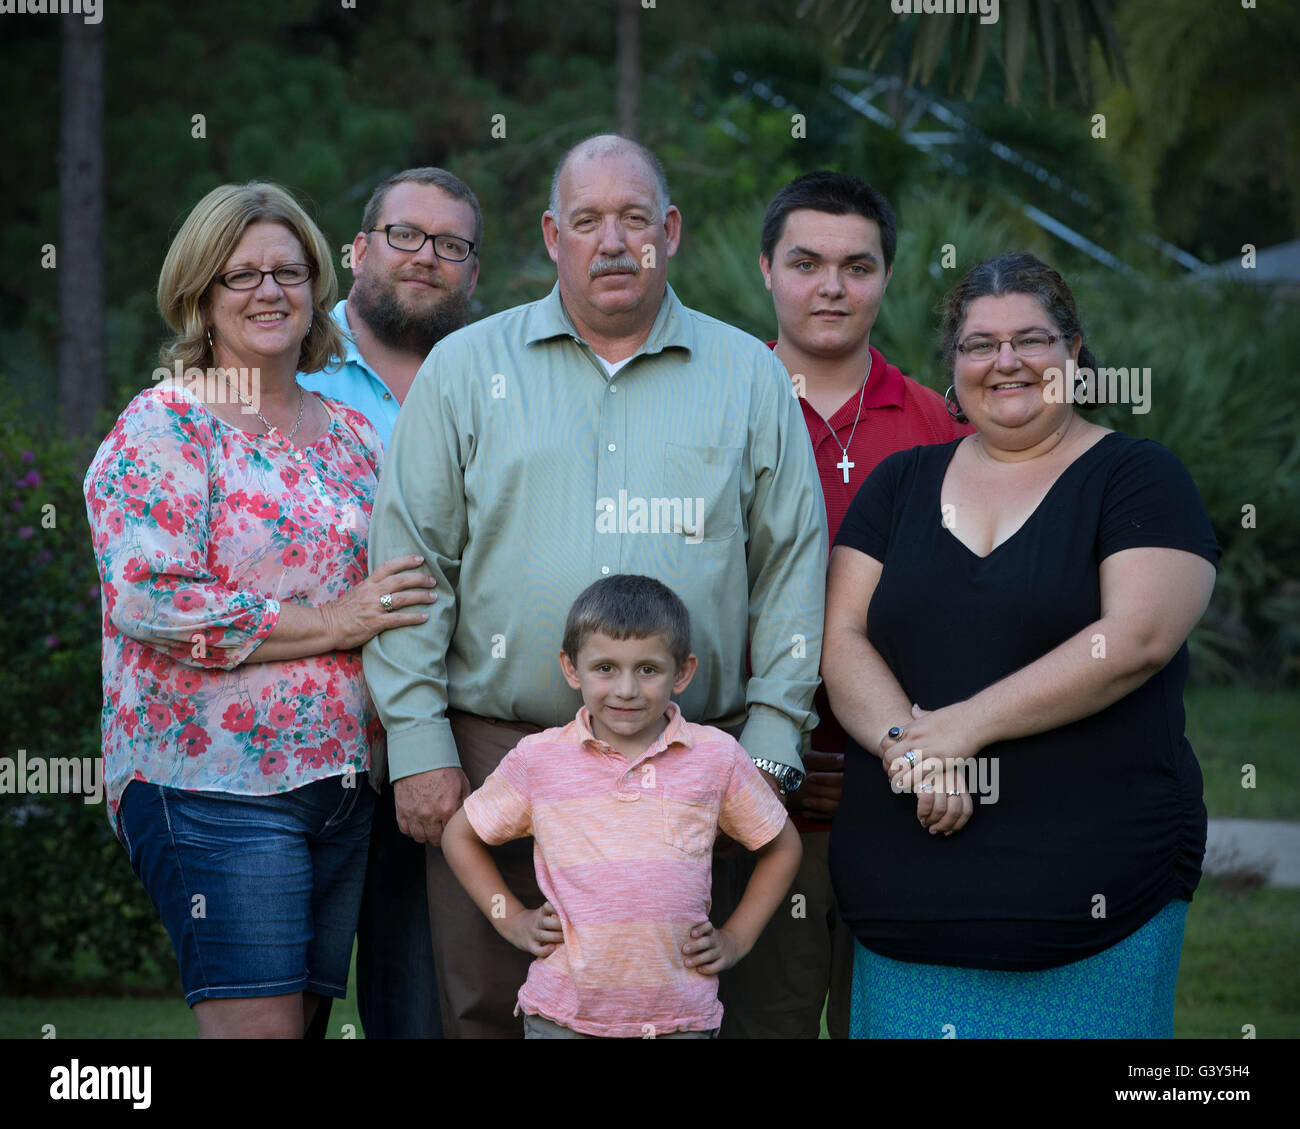 Jupiter, Florida, USA. 16th June, 2016. Gary Weidenhamer (center) stands behind his grandson, Bradley, 5, named after his son who was killed by a gator on the Loxahatchee River in 1993. (l to r) Wife, Donna, son, Brent, grandson, Justin, 14, and daughter-in-law, Leaha Weidenhamer.''The hardest part is a few weeks later, when everyone else's lives go back to normal. Your's doesn't.'' says Gary Weidenhamer. The Weidenhamer's know because their 10-year-old son Bradley died in the grips of a gator that attacked on the Loxahatchee River in Jupiter on June 19, 1993. (Credit Image: © Allen Eyeston Stock Photo